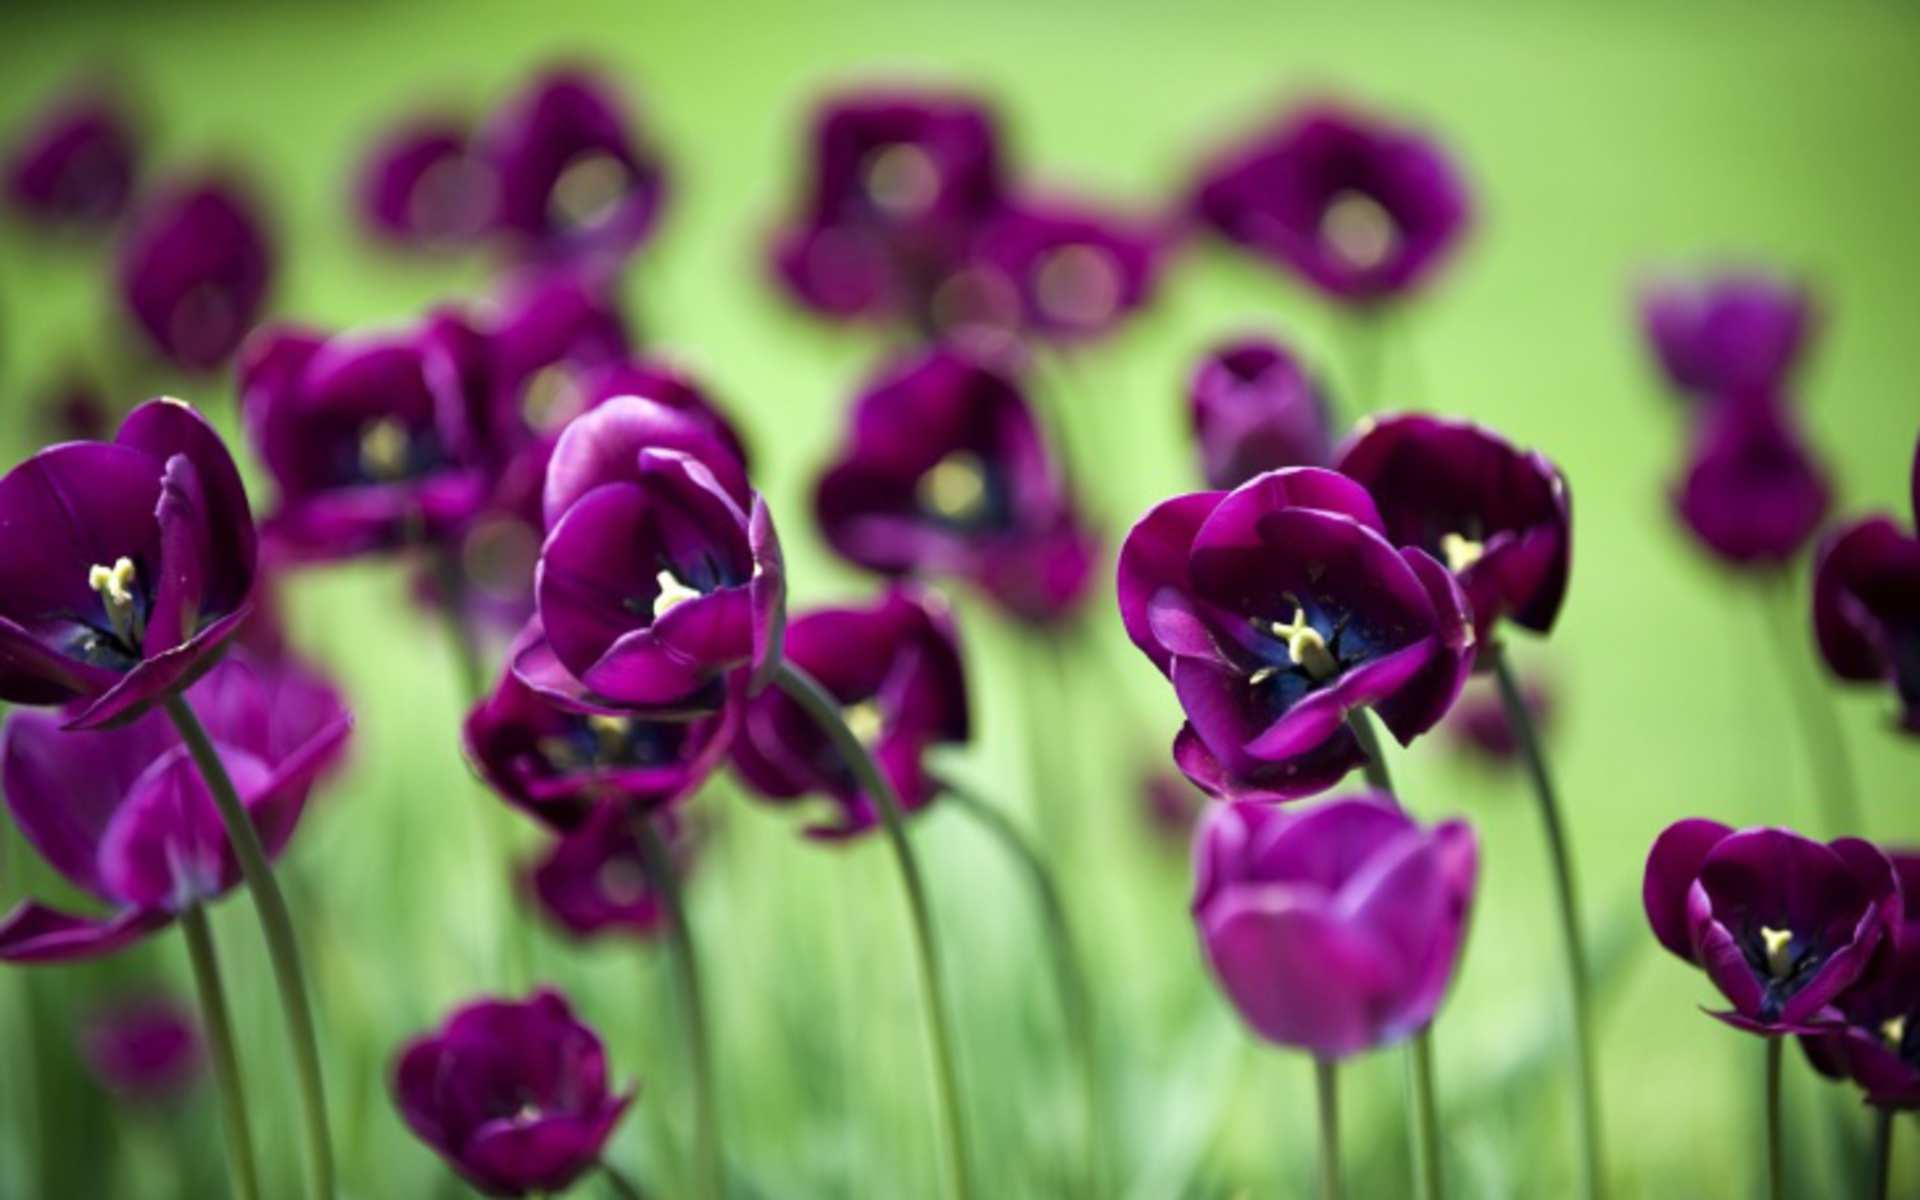 DOWNLOAD: purple tulips free picture 2560 x 1600